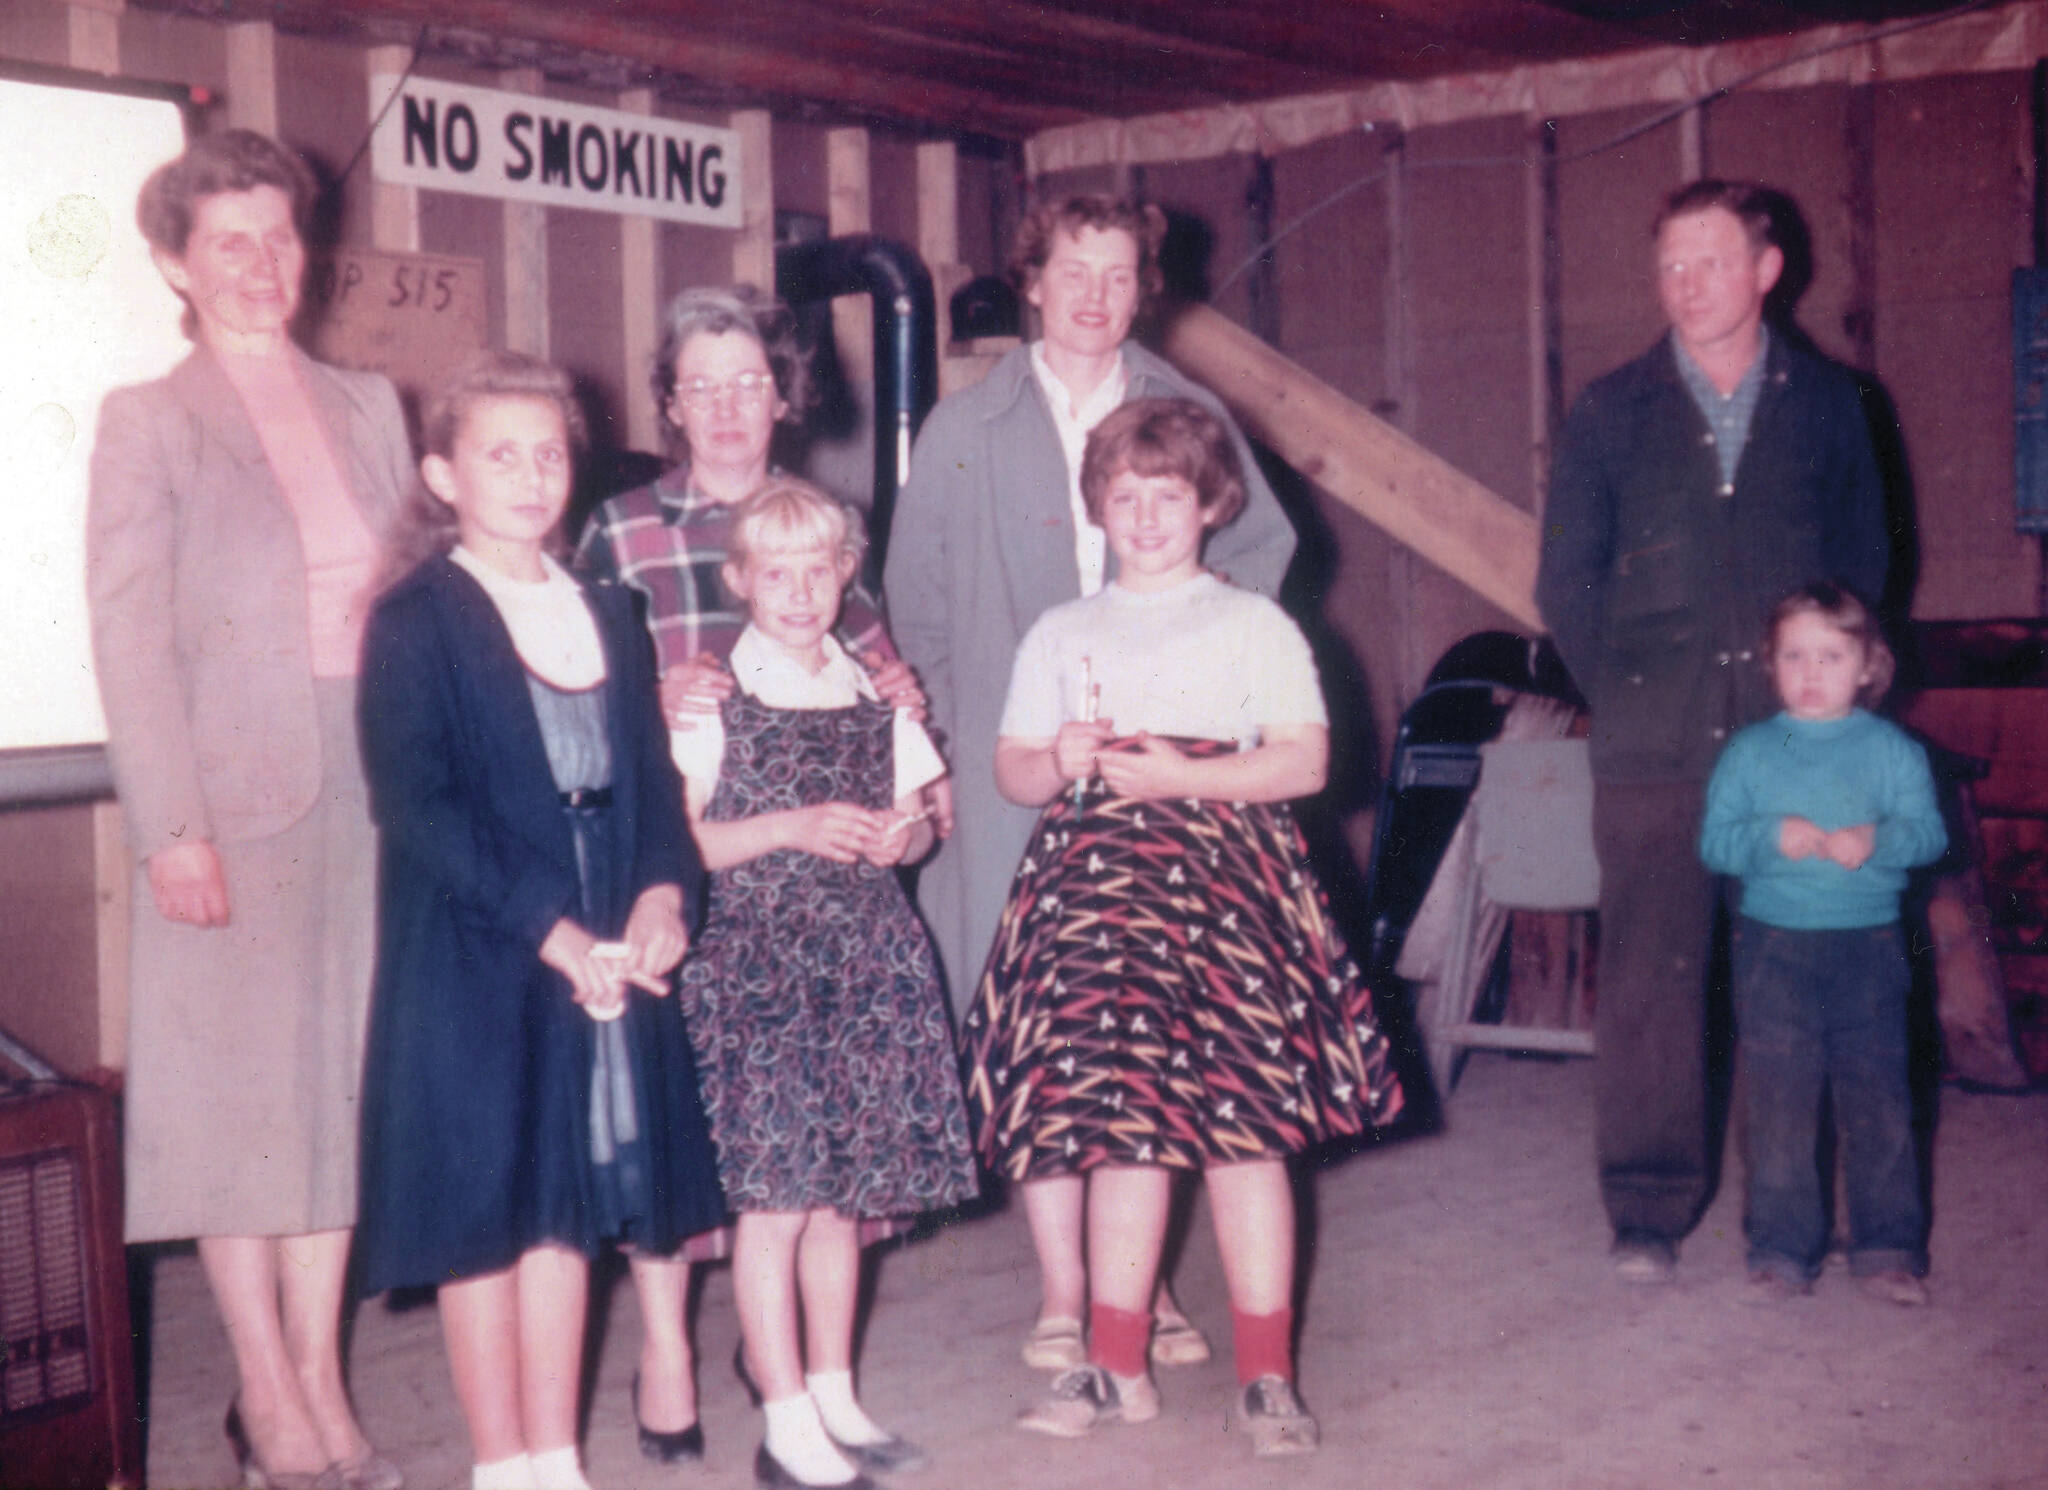 Ray Sandstrom photo courtesy of the Lancashire Family Collection
A 4-H Club meeting in the mid-1950s in the Soldotna Community Club: (L-R) Marge and Eileen Mullen, Virginia and Joyce Gibbs, Rusty and Abby Lancashire, and U.S. Home Extension agent Ed Liebenthal and his daughter.